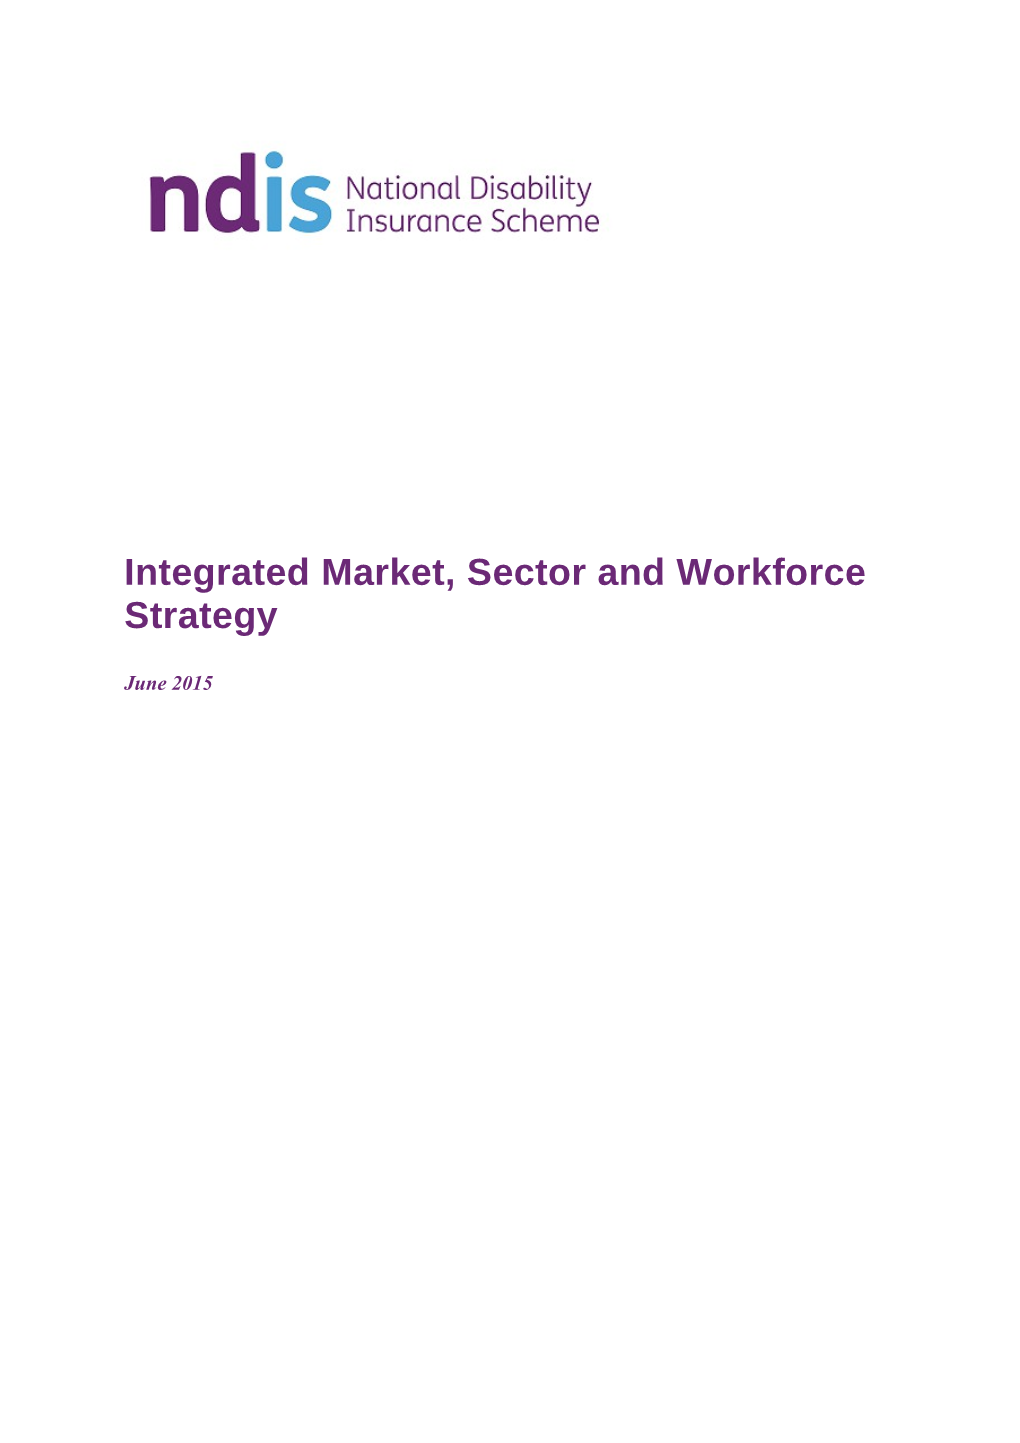 Integrated Market, Sector and Workforce Strategy